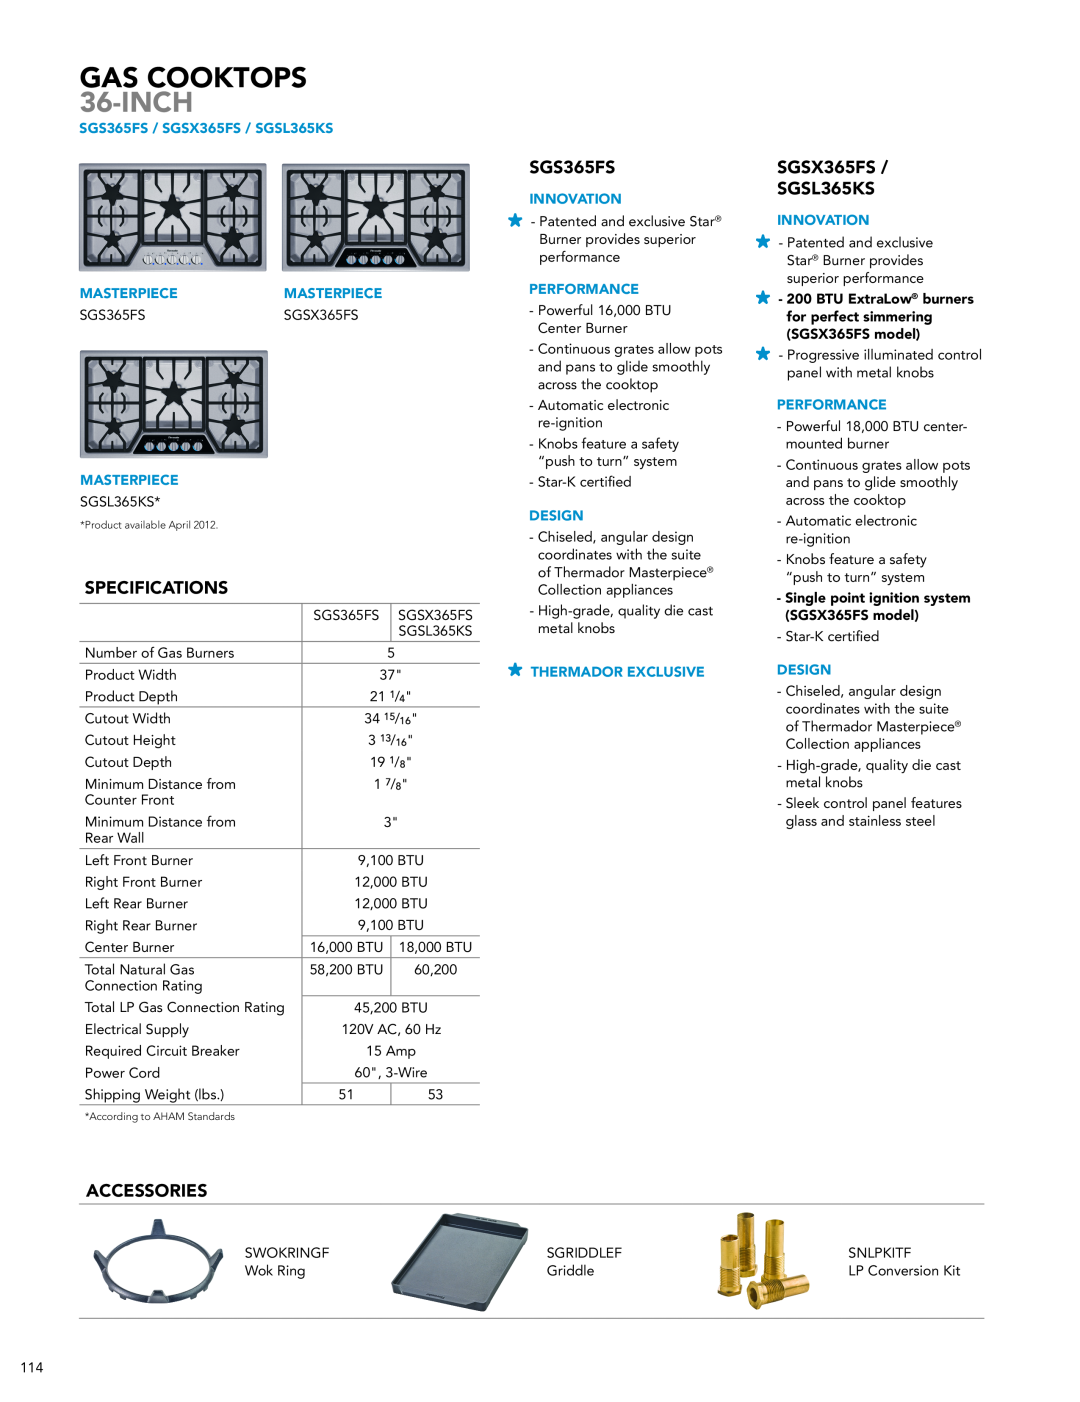 Thermador GAS COOKTOPS 36-Inch, SGS365FS, SGSX365FS SGSL365KS, Specifications, Accessories, Innovation, Performance 